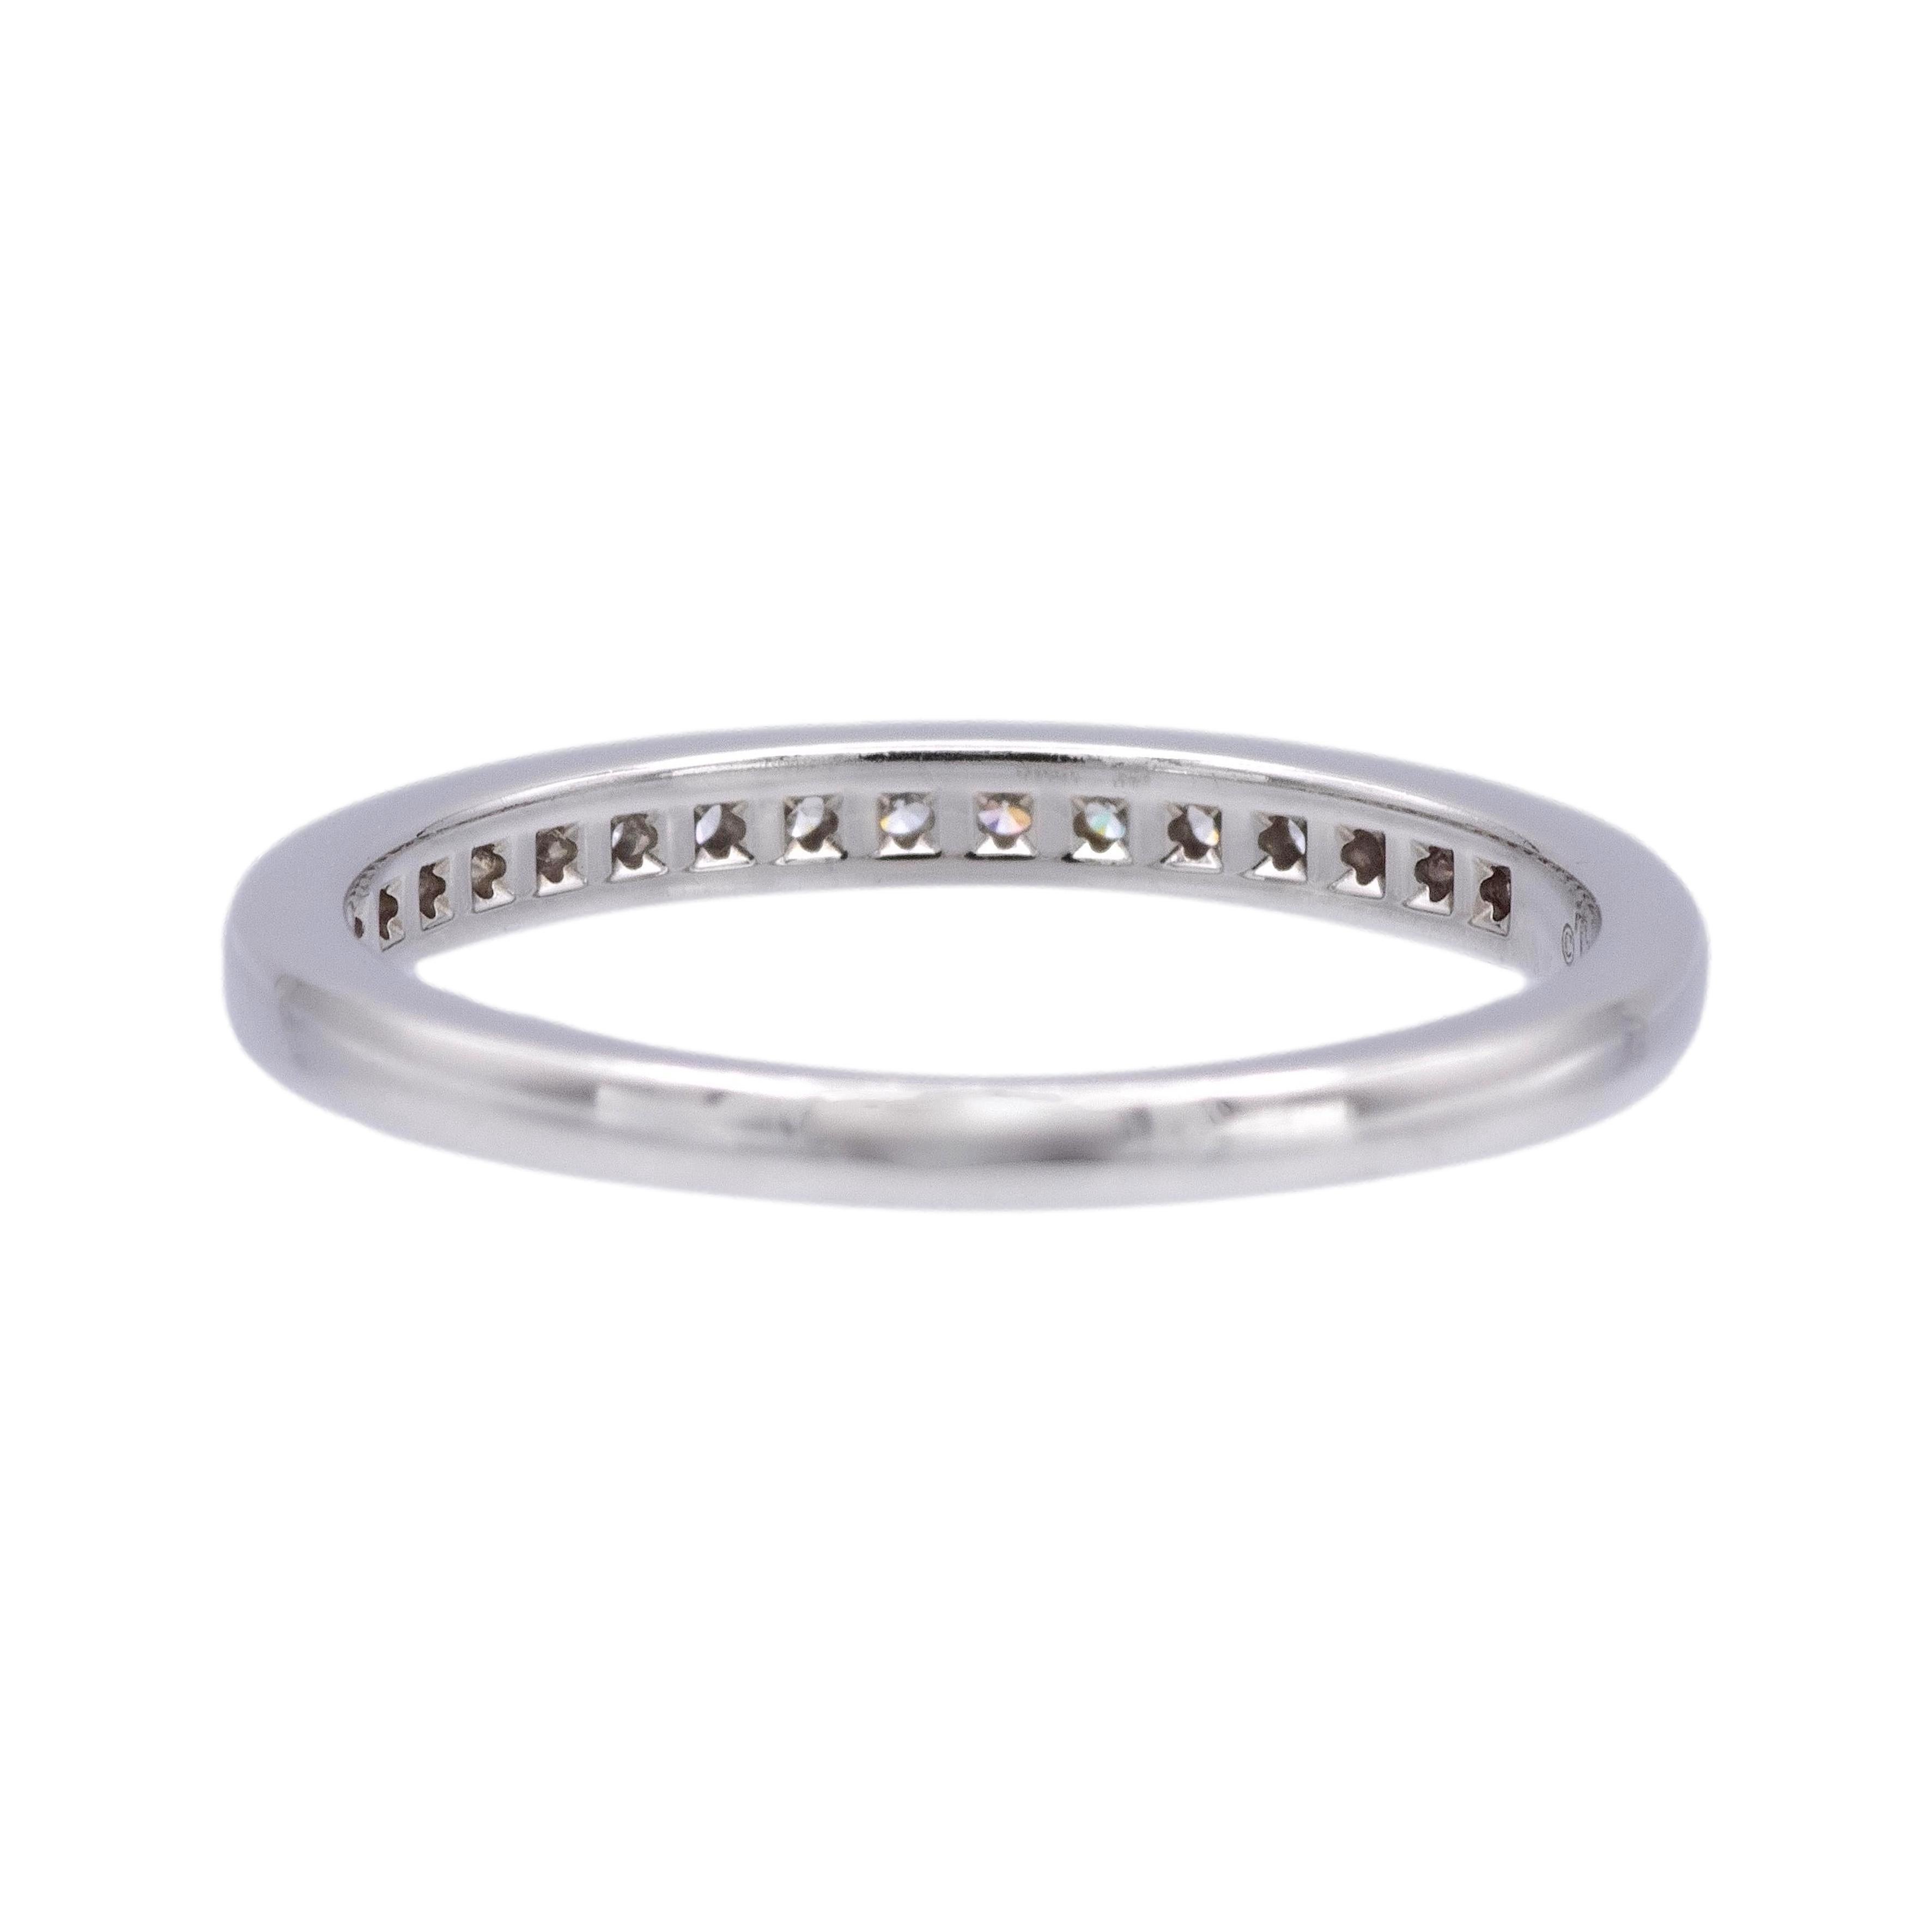 Taille brillant Tiffany & Co Platinum Half Circle Eternity Band Ring .17ct 2 mm Size 6 en vente